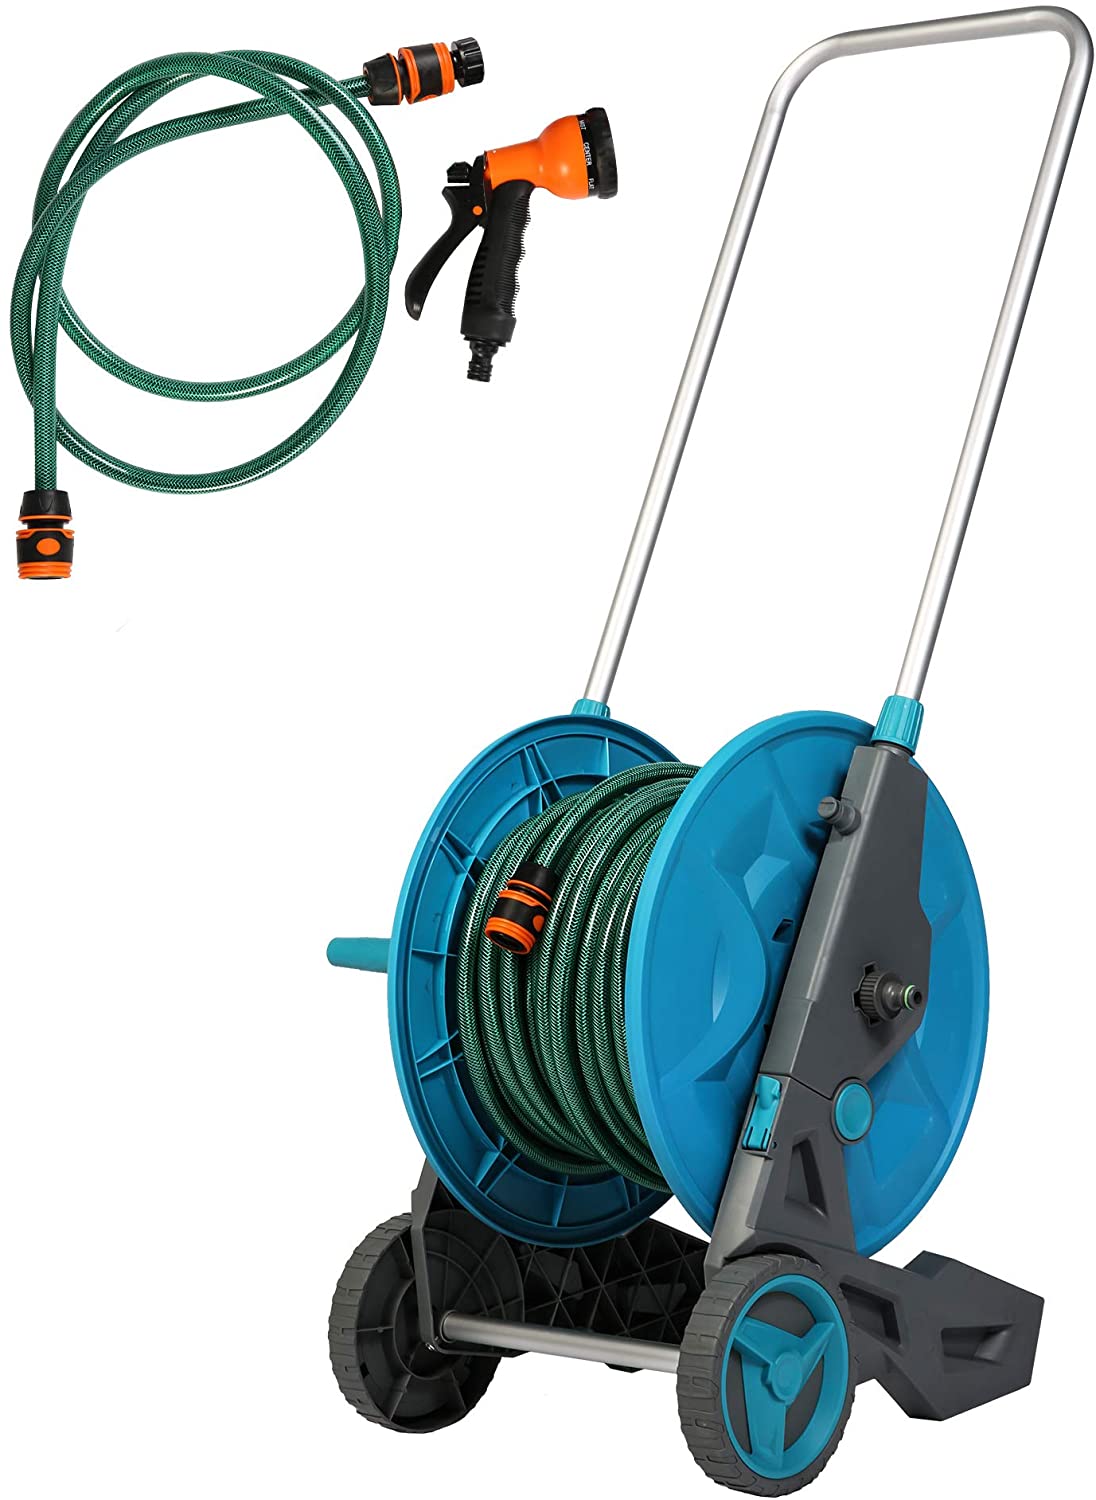 130 Feet Garden Hose Reel Aluminum Hose Reel Cart with Wheels 3/4 Inch 6.6 Feet Leader Hose 7 Patterns Nozzle Included